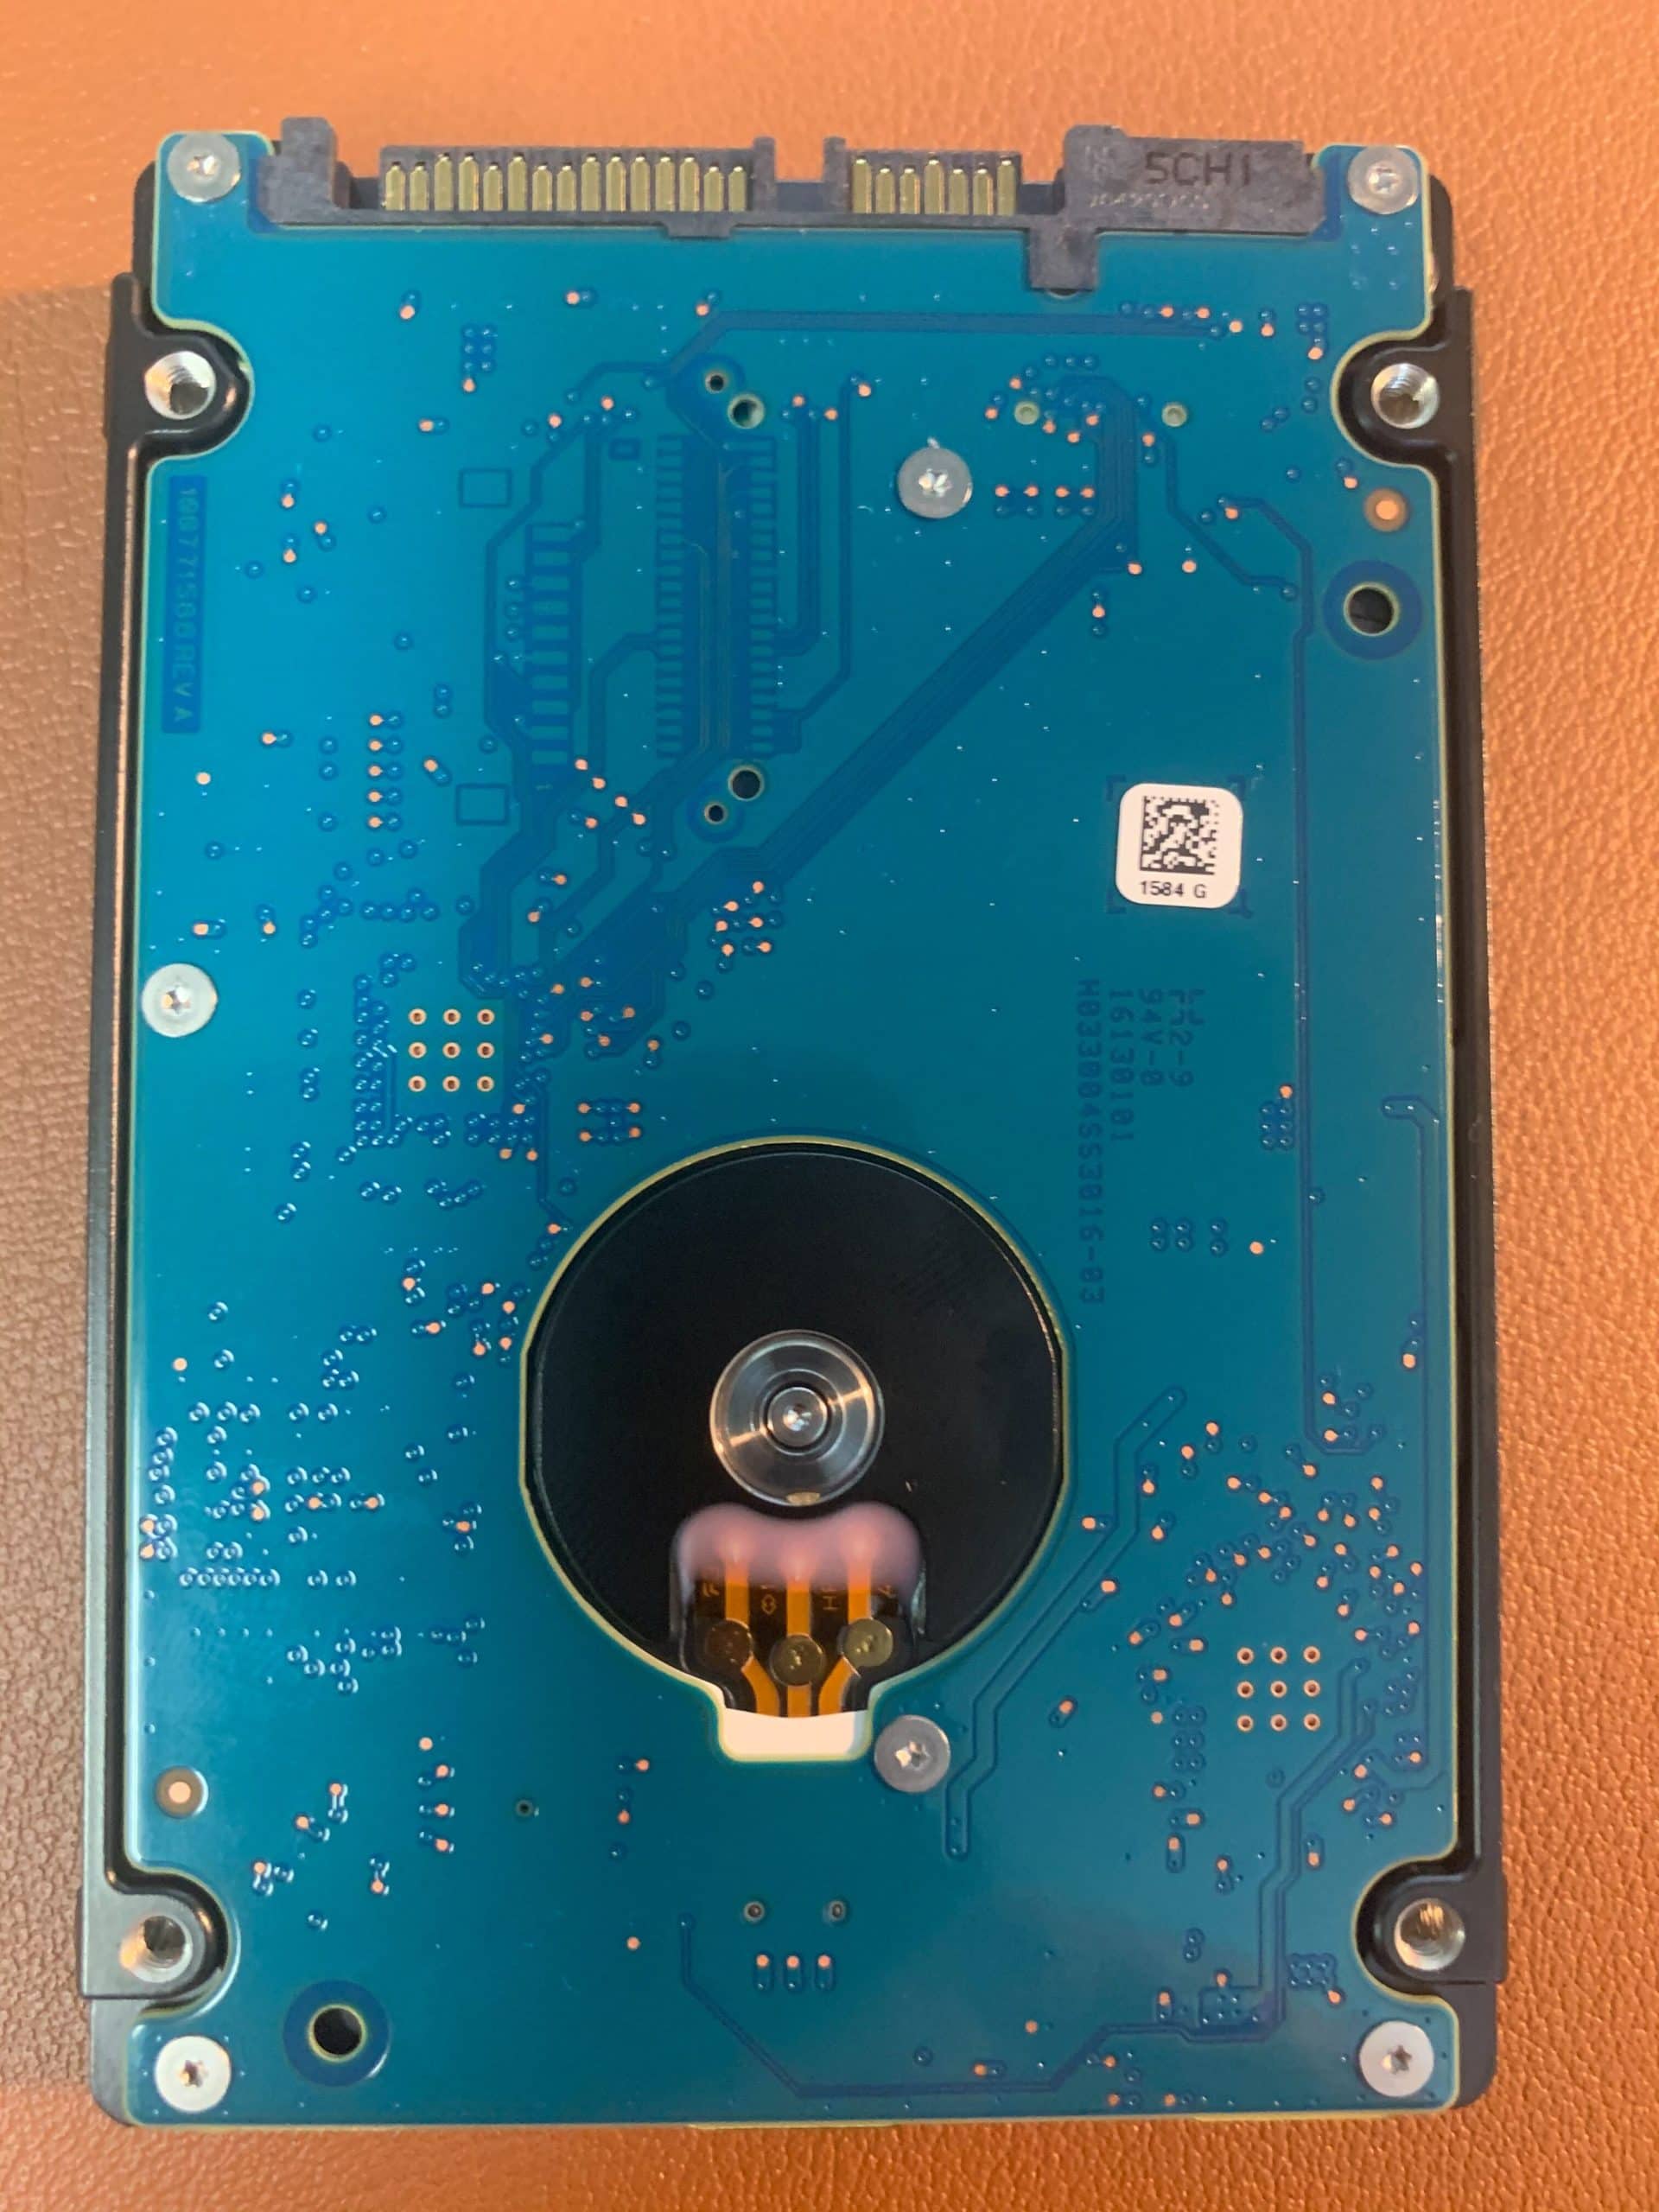 Seagate ST4000LM016 4TB PCB View Recovering Failed Time Machine Backup